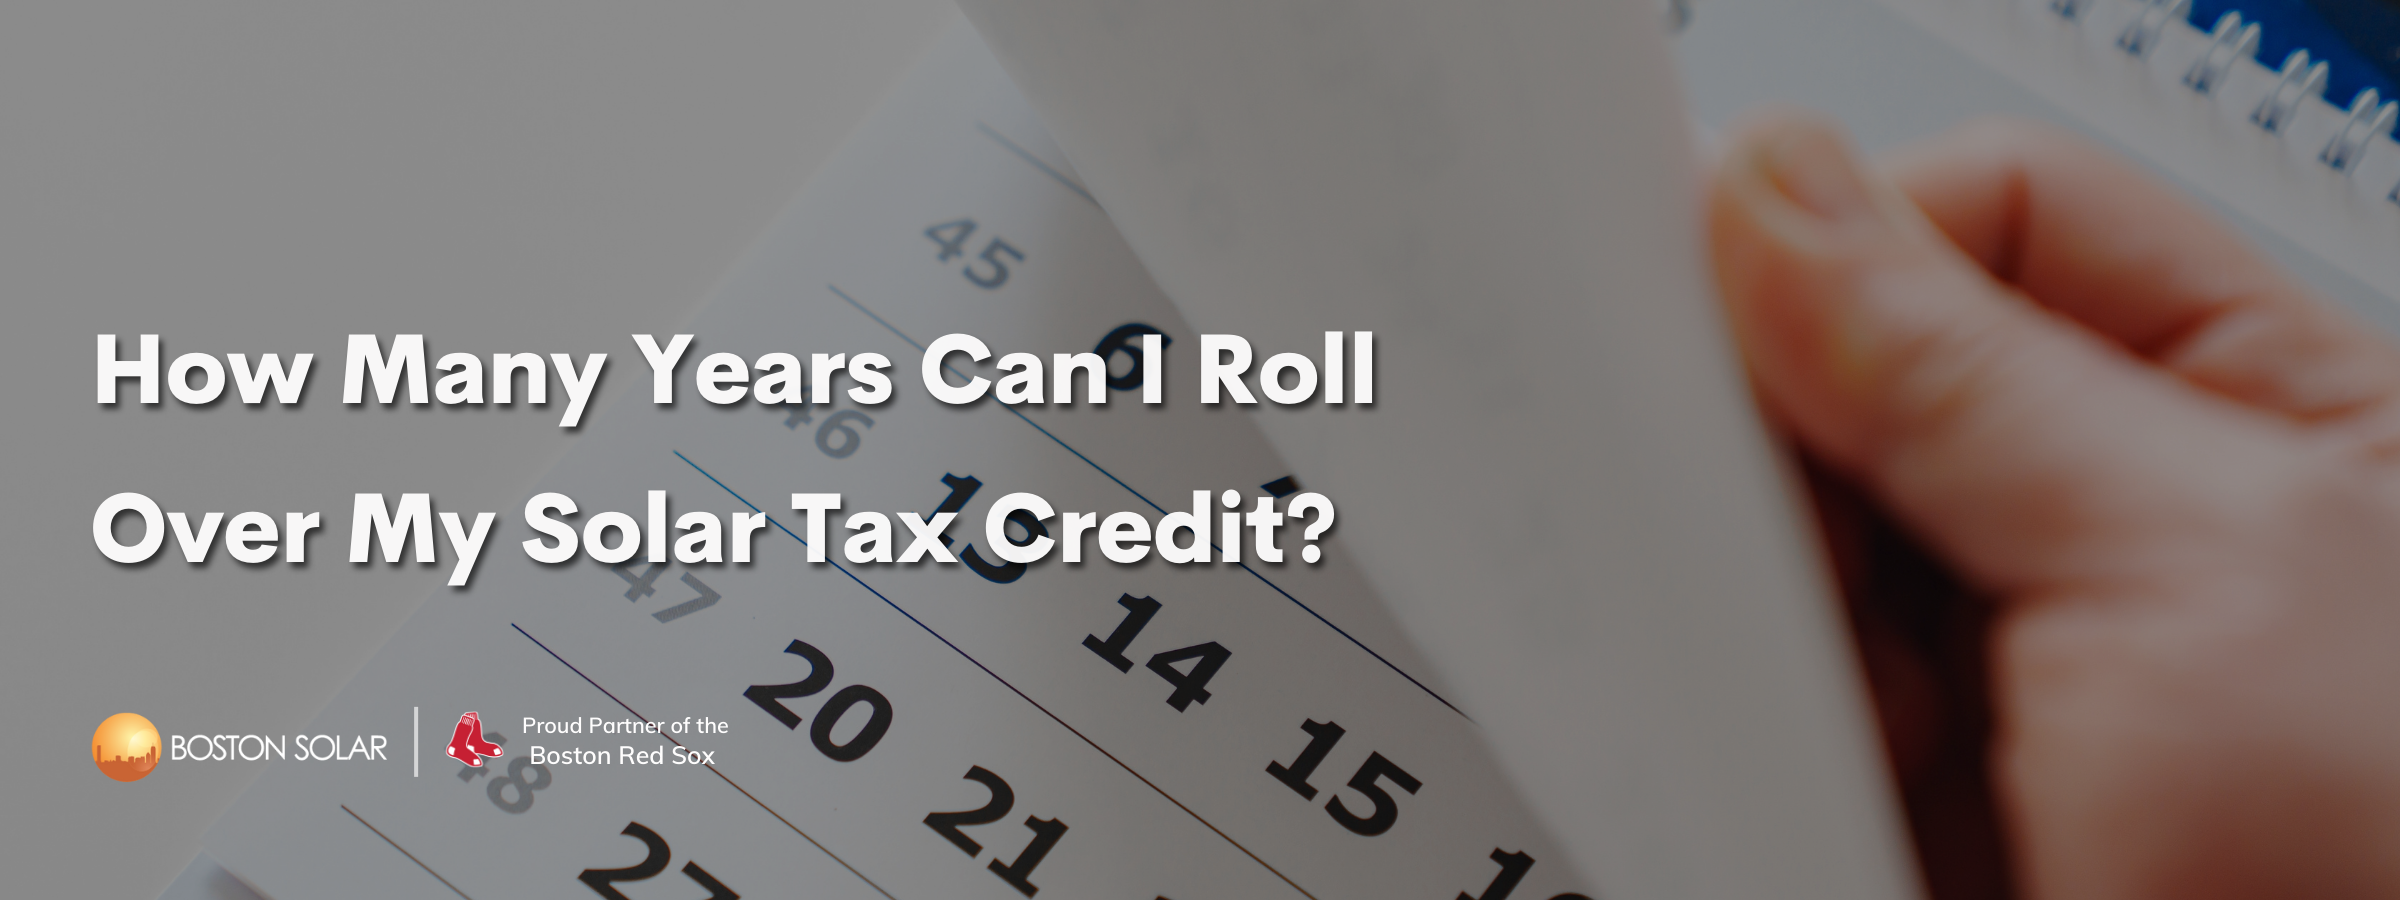 How Many Years Can I Roll Over My Solar Tax Credit?